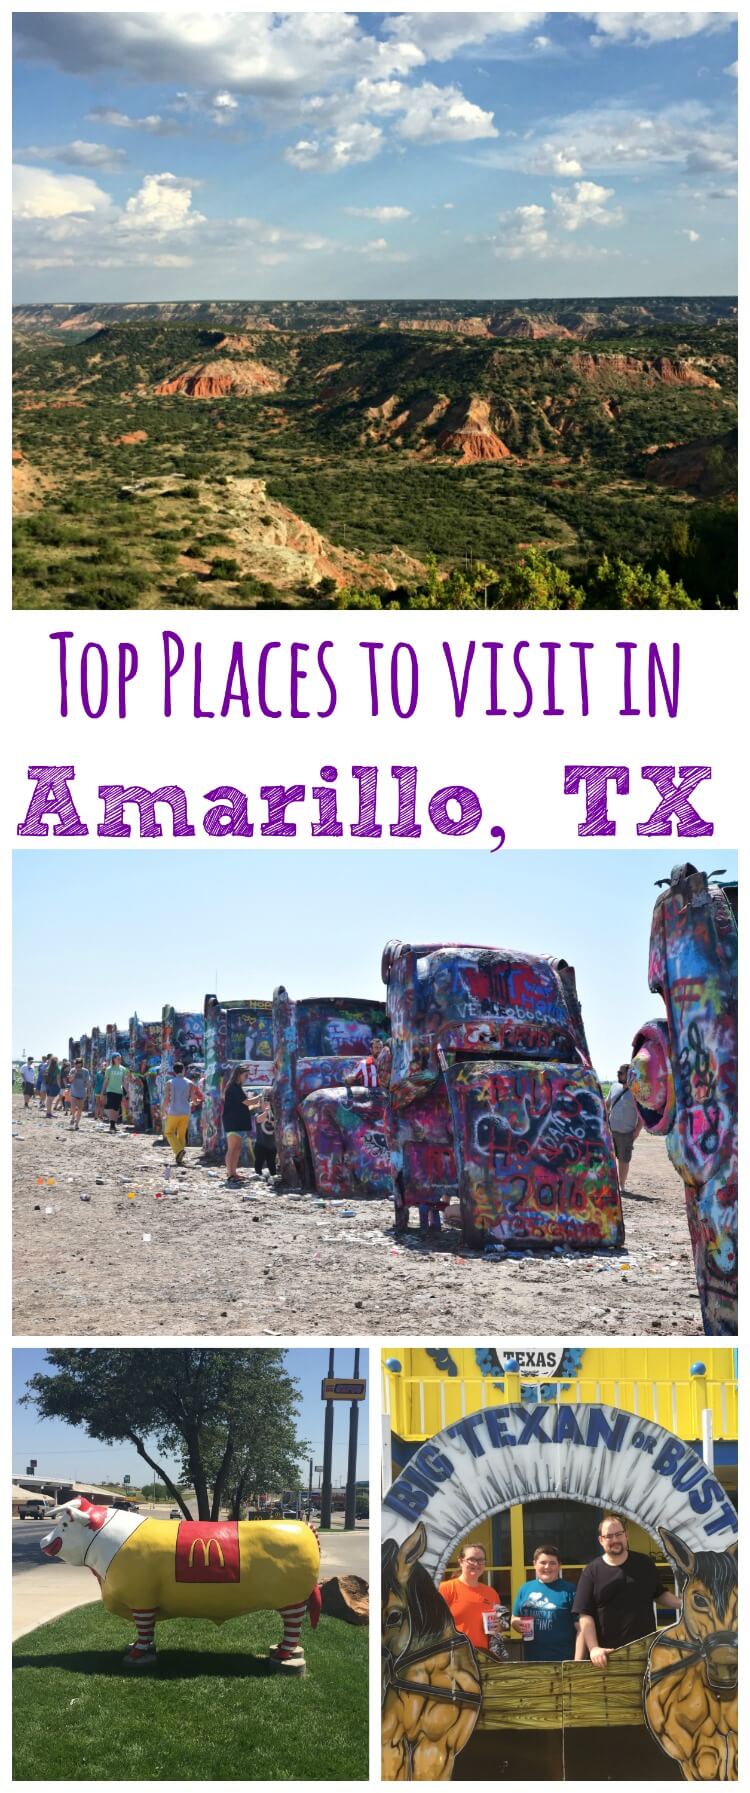 What are our top 3 places to visit in #Amarillo #Texas? Come see! #ad #RoadTripOil #travel